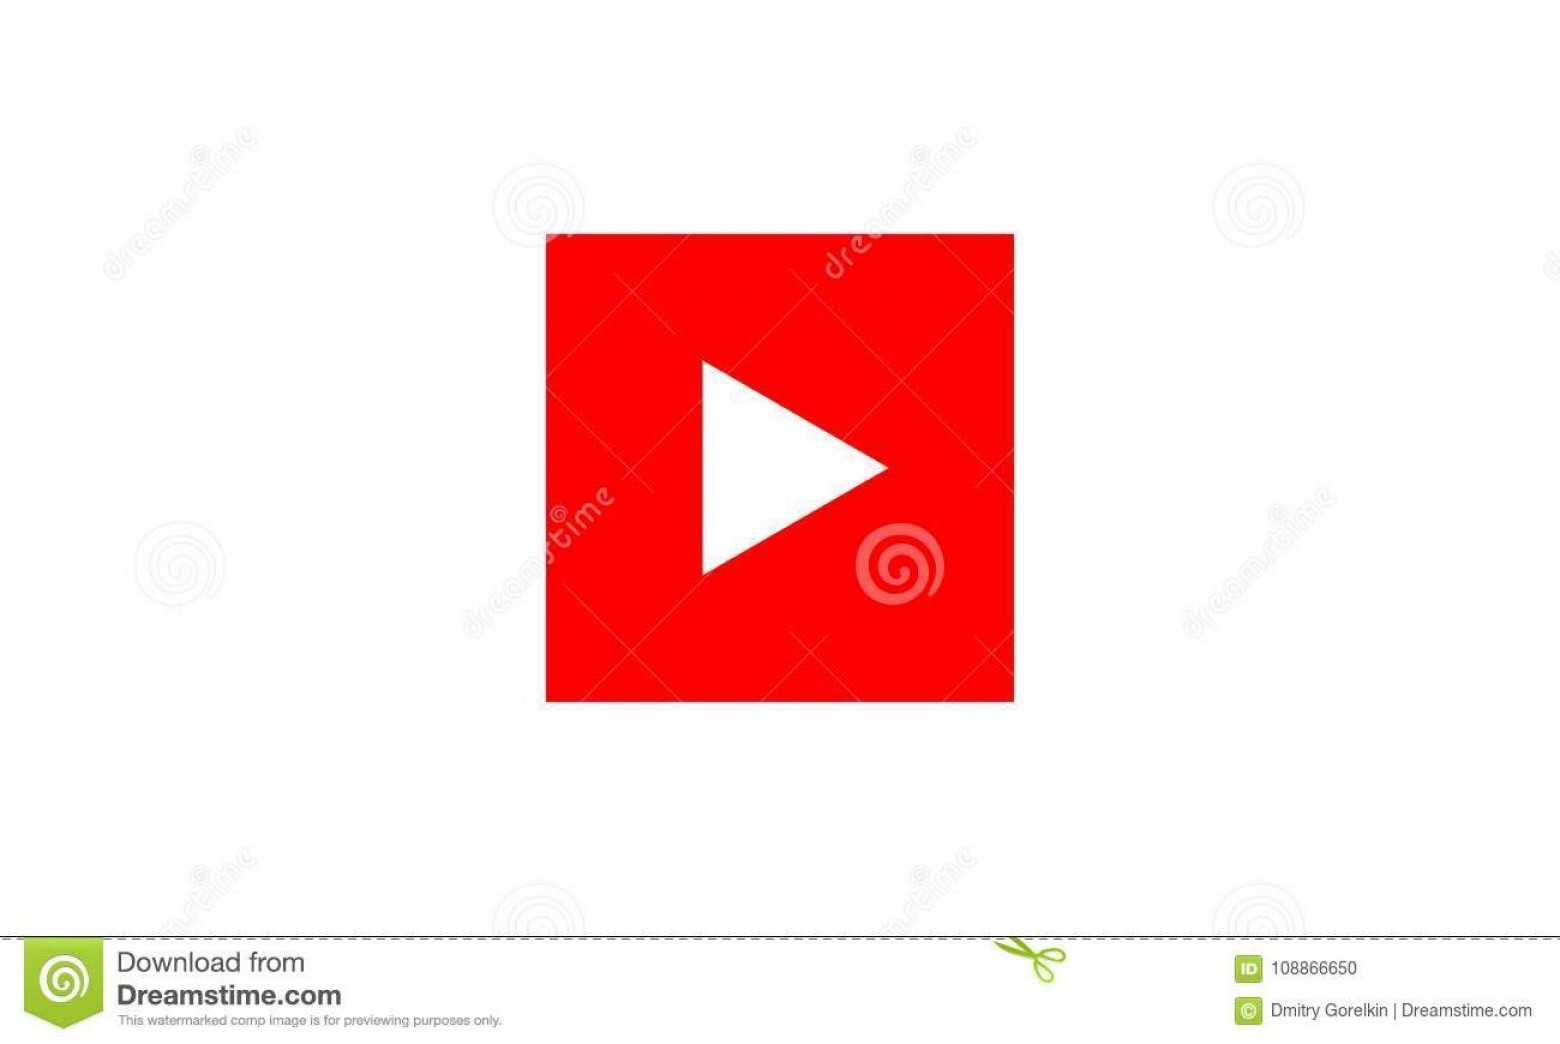 youtube red play button